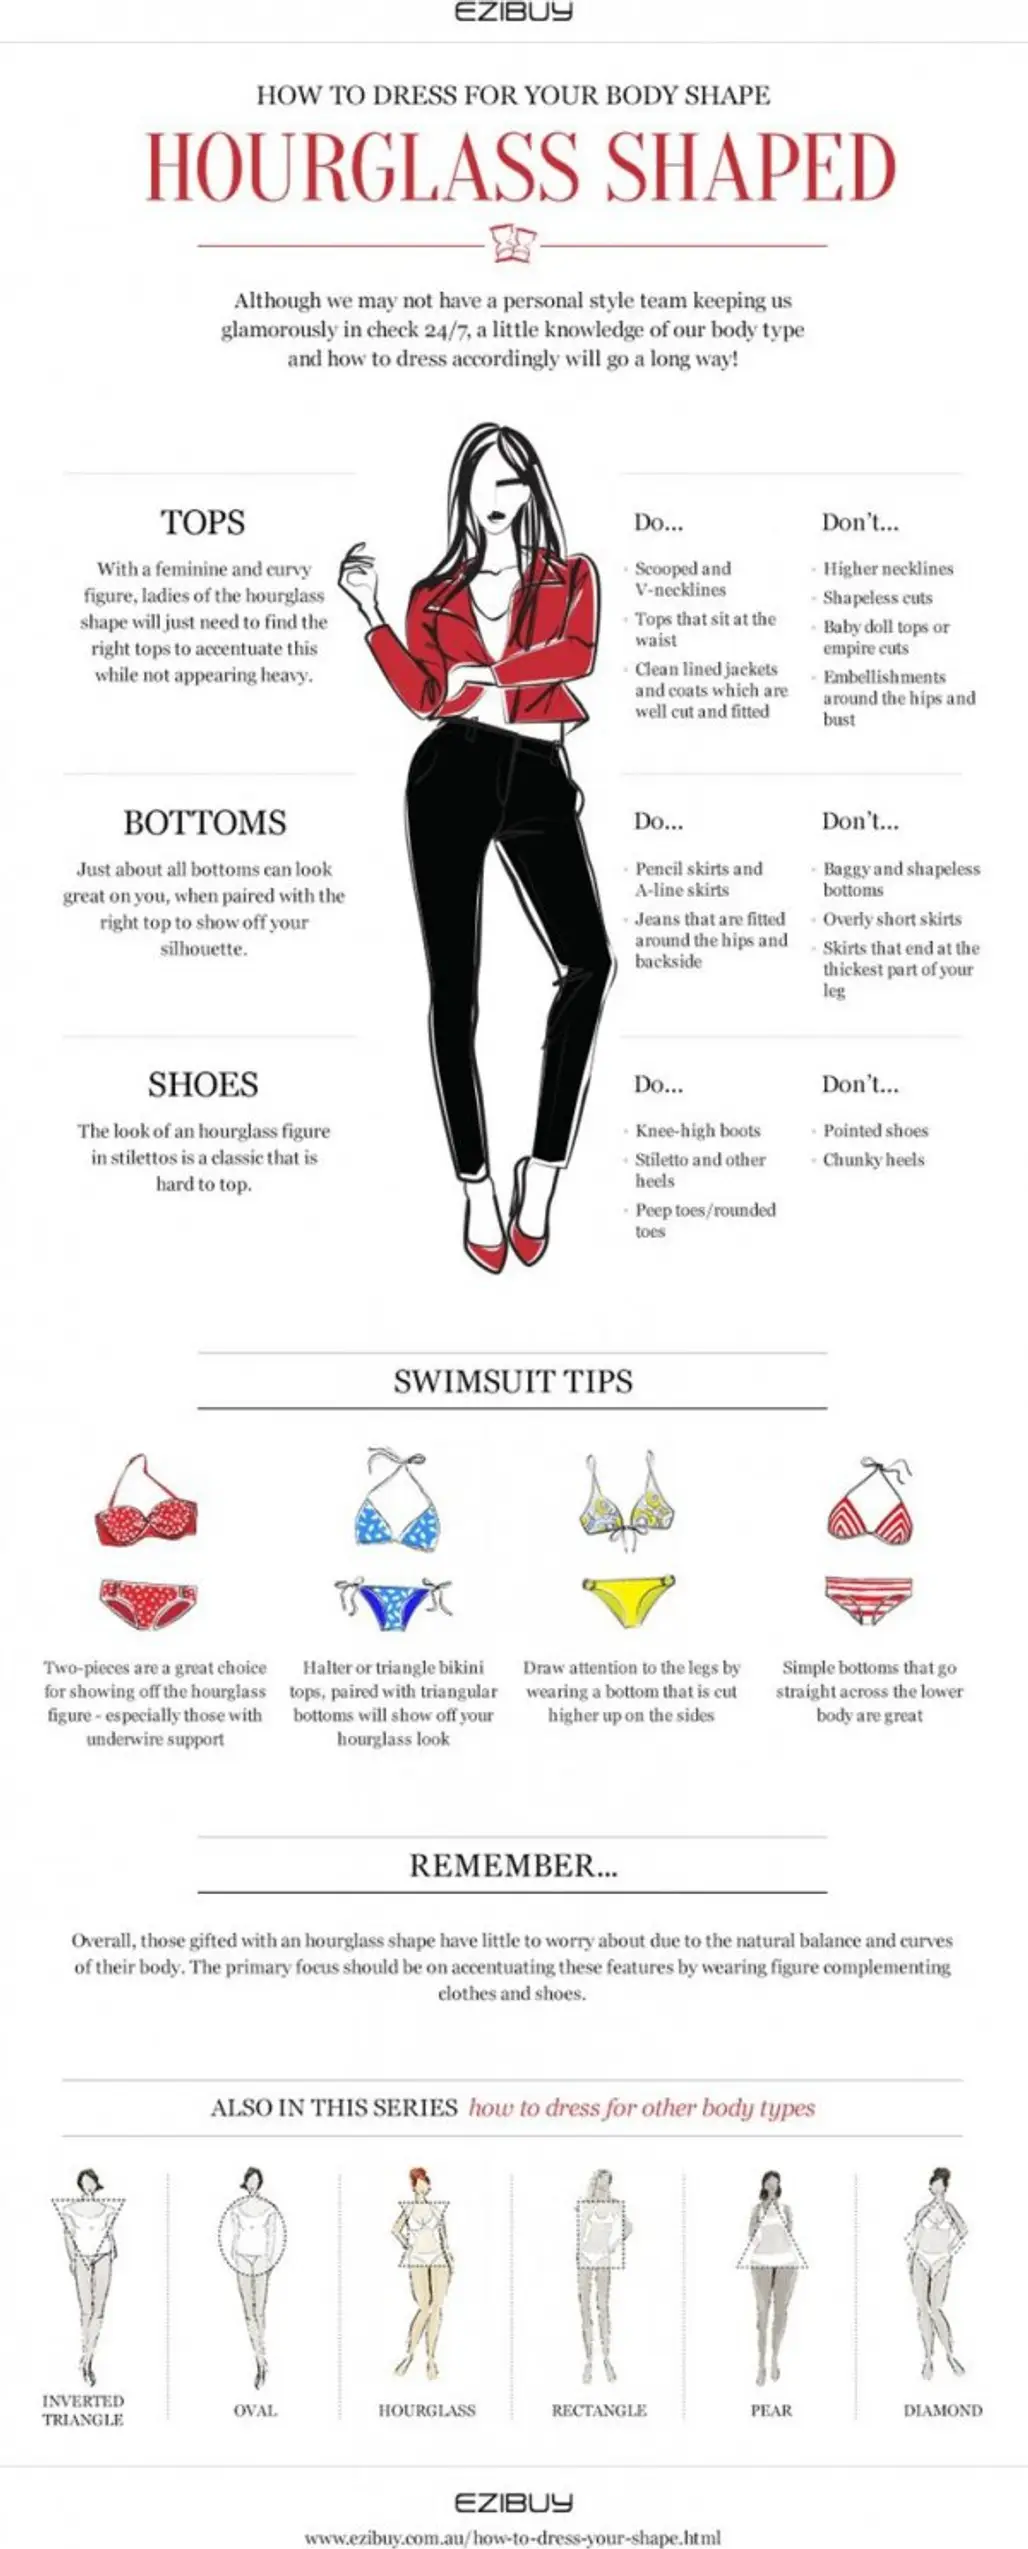 How to Dress for Your Body Shape - Hourglass